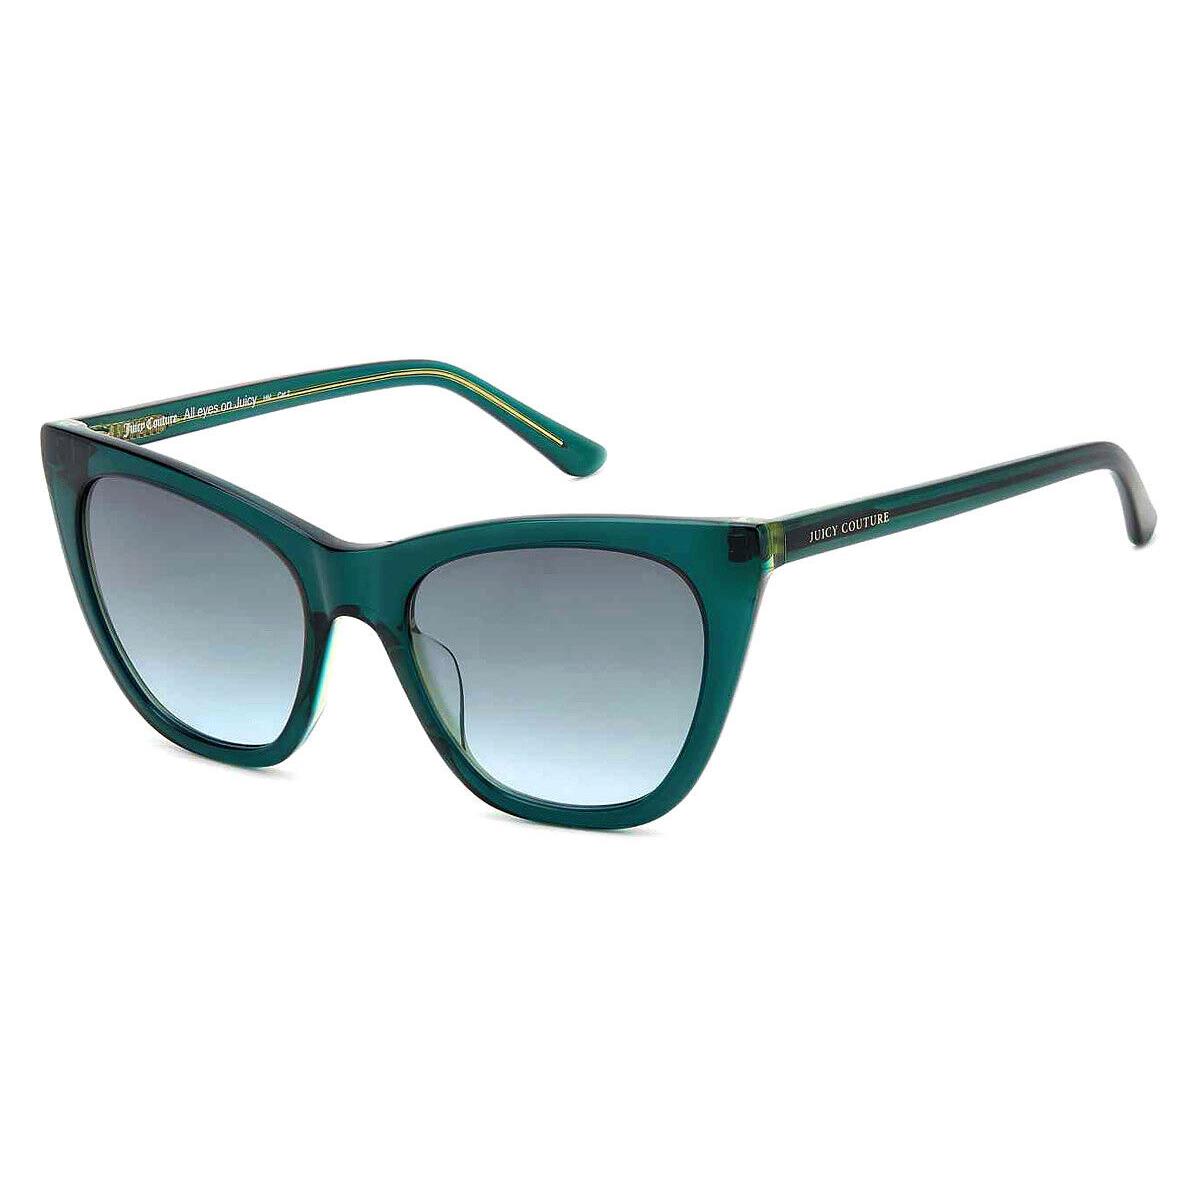 Juicy Couture Juc Sunglasses Crystal Green / Gray Shaded Green - Frame: Crystal Green / Gray Shaded Green, Lens: Gray Shaded Green